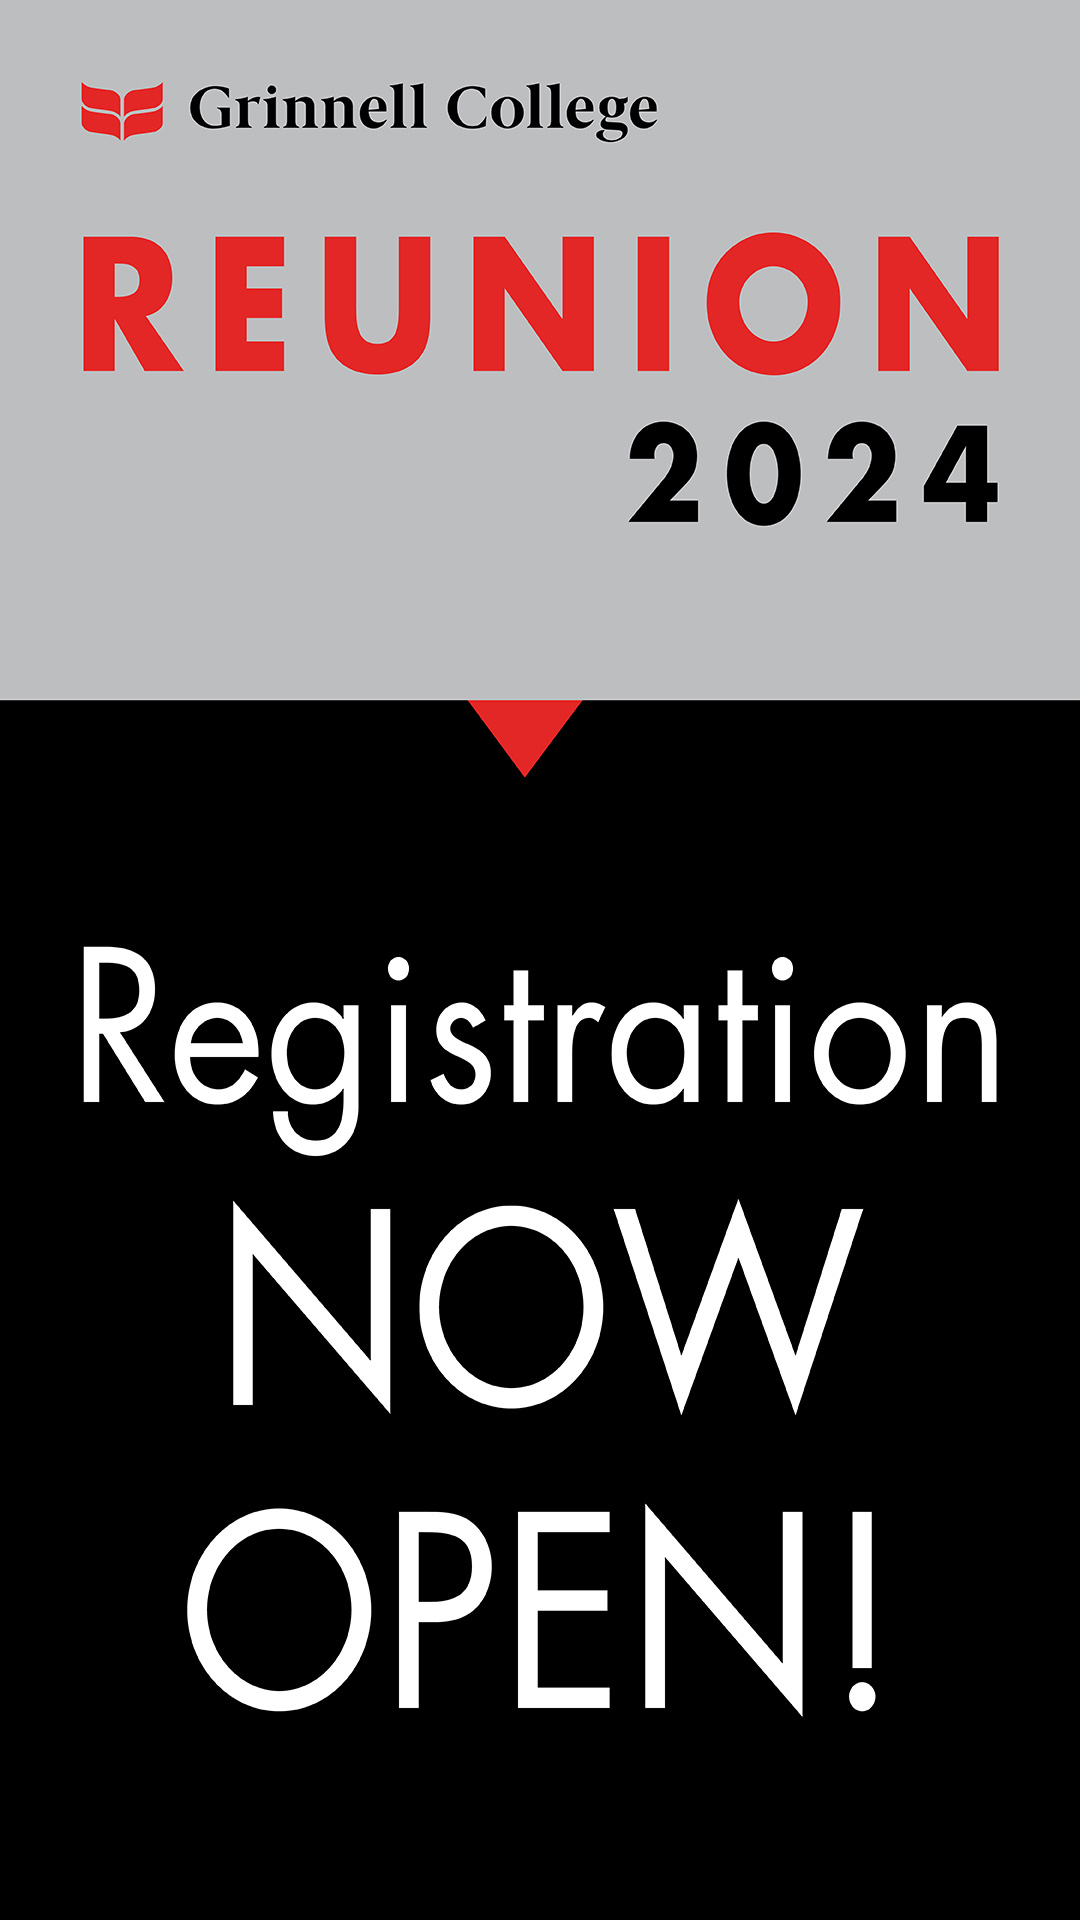 Red, White, and Black Text on a gray and black background. Text: Reunion 2024. Registration Now Open!